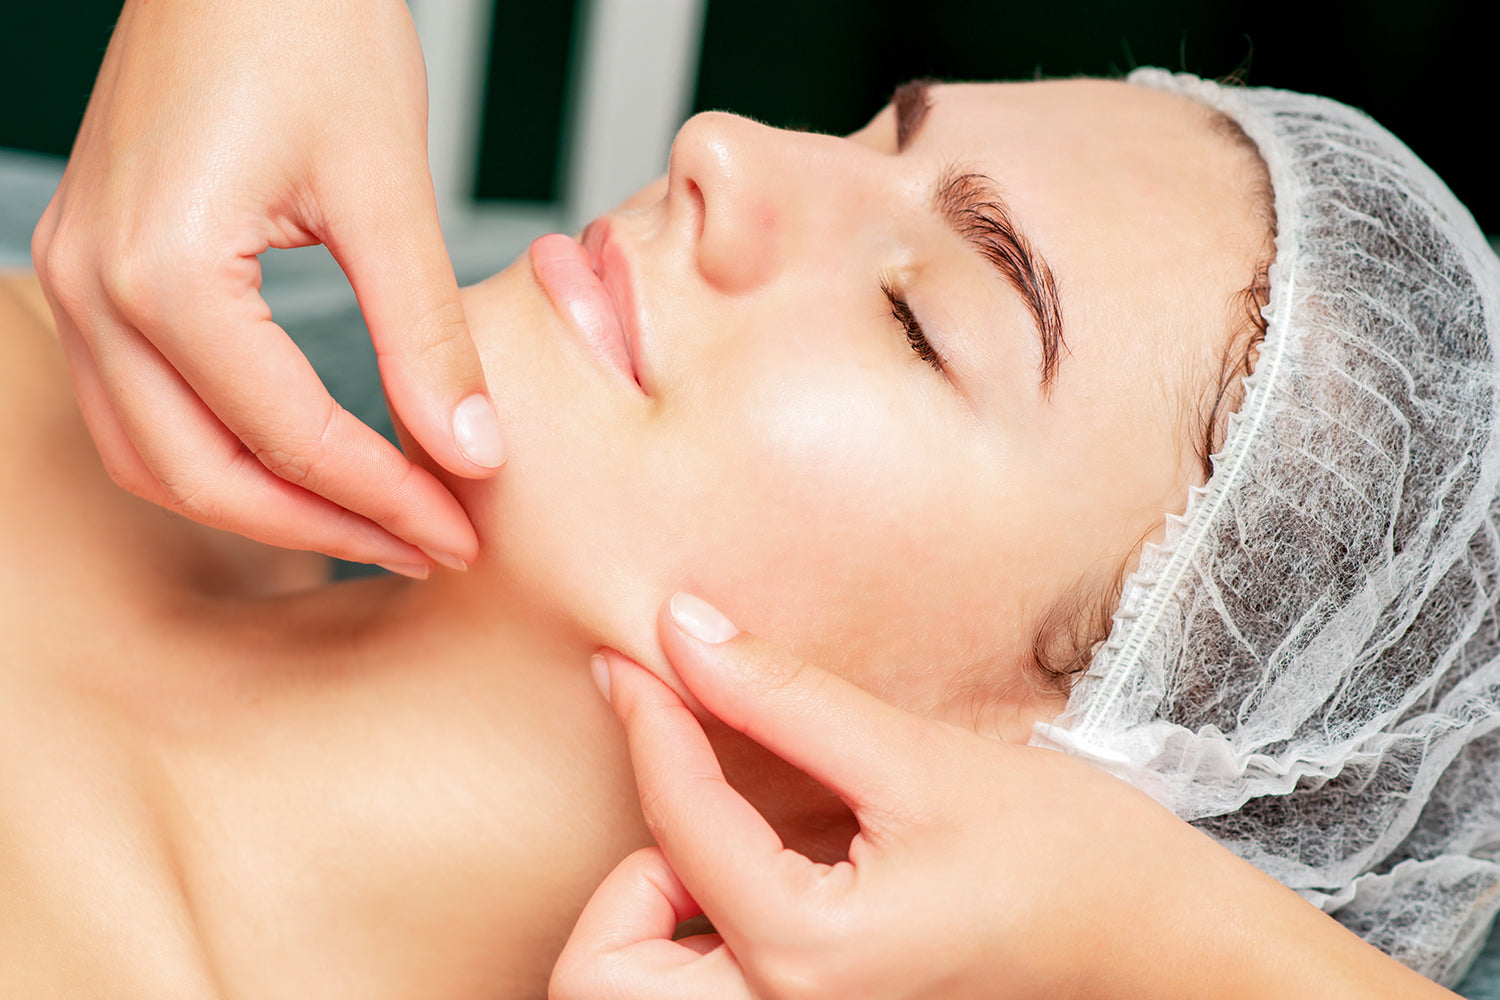 Woman receiving a lymphatic drainage facial massage